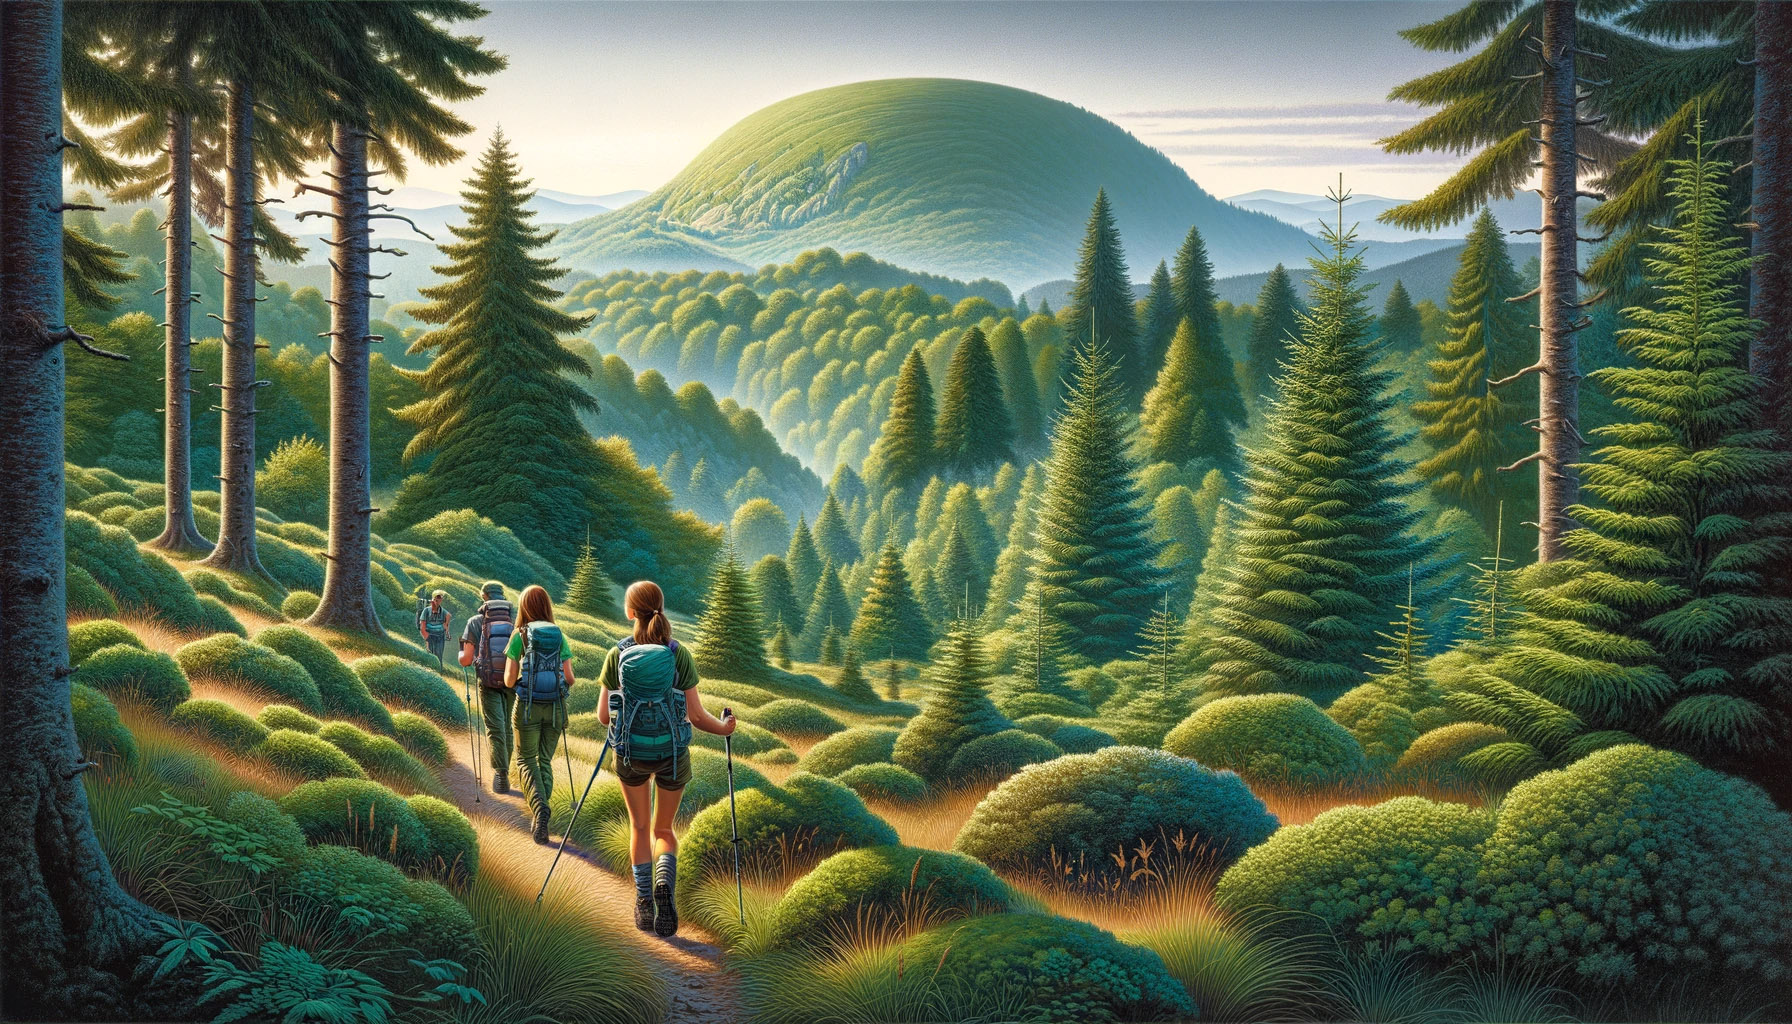 hikers in the Vosges Mountains, France. The scene shows the lush, forested landscape of the Vosges